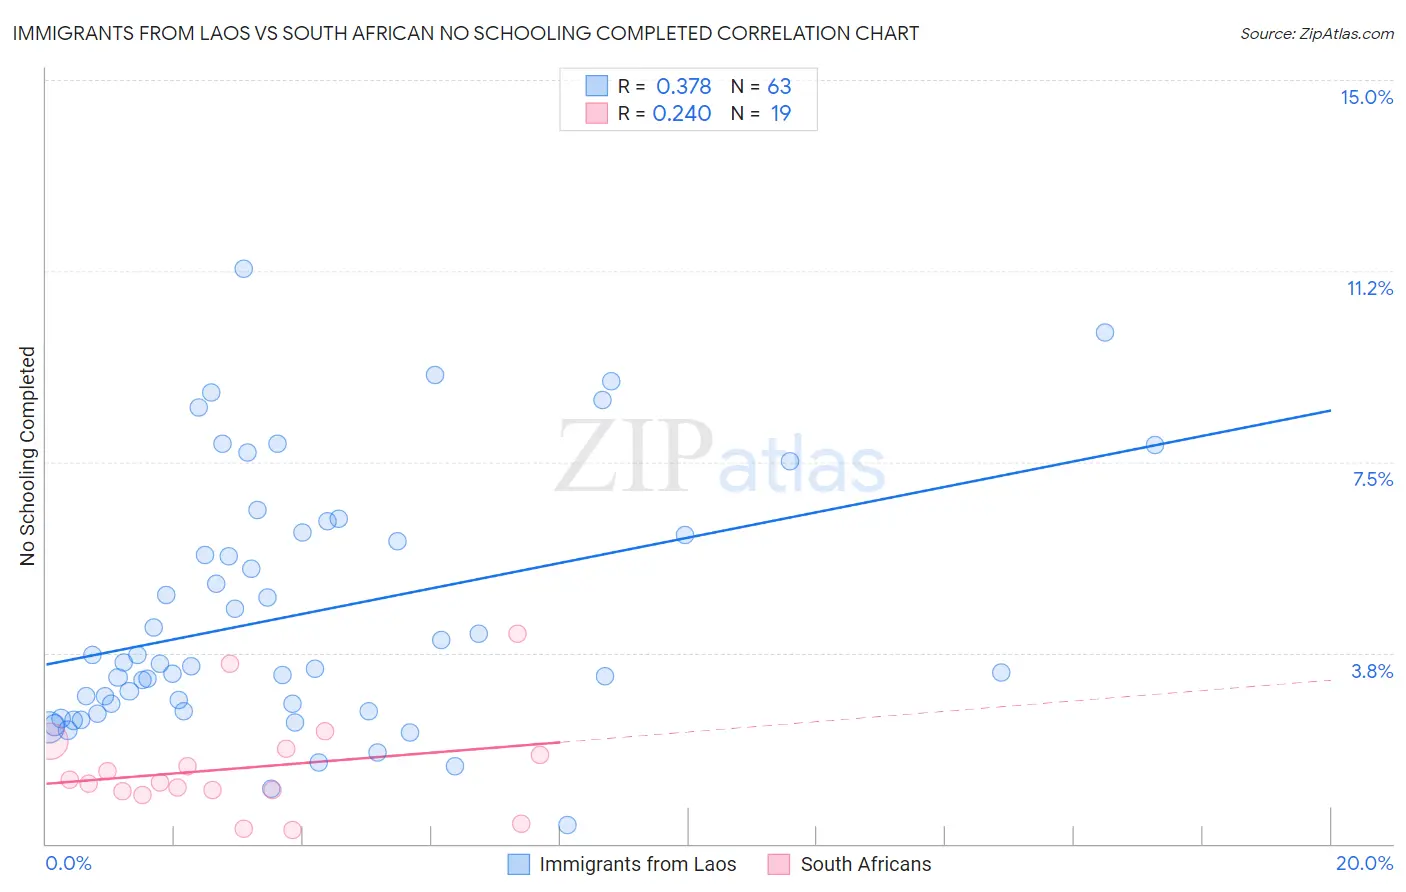 Immigrants from Laos vs South African No Schooling Completed